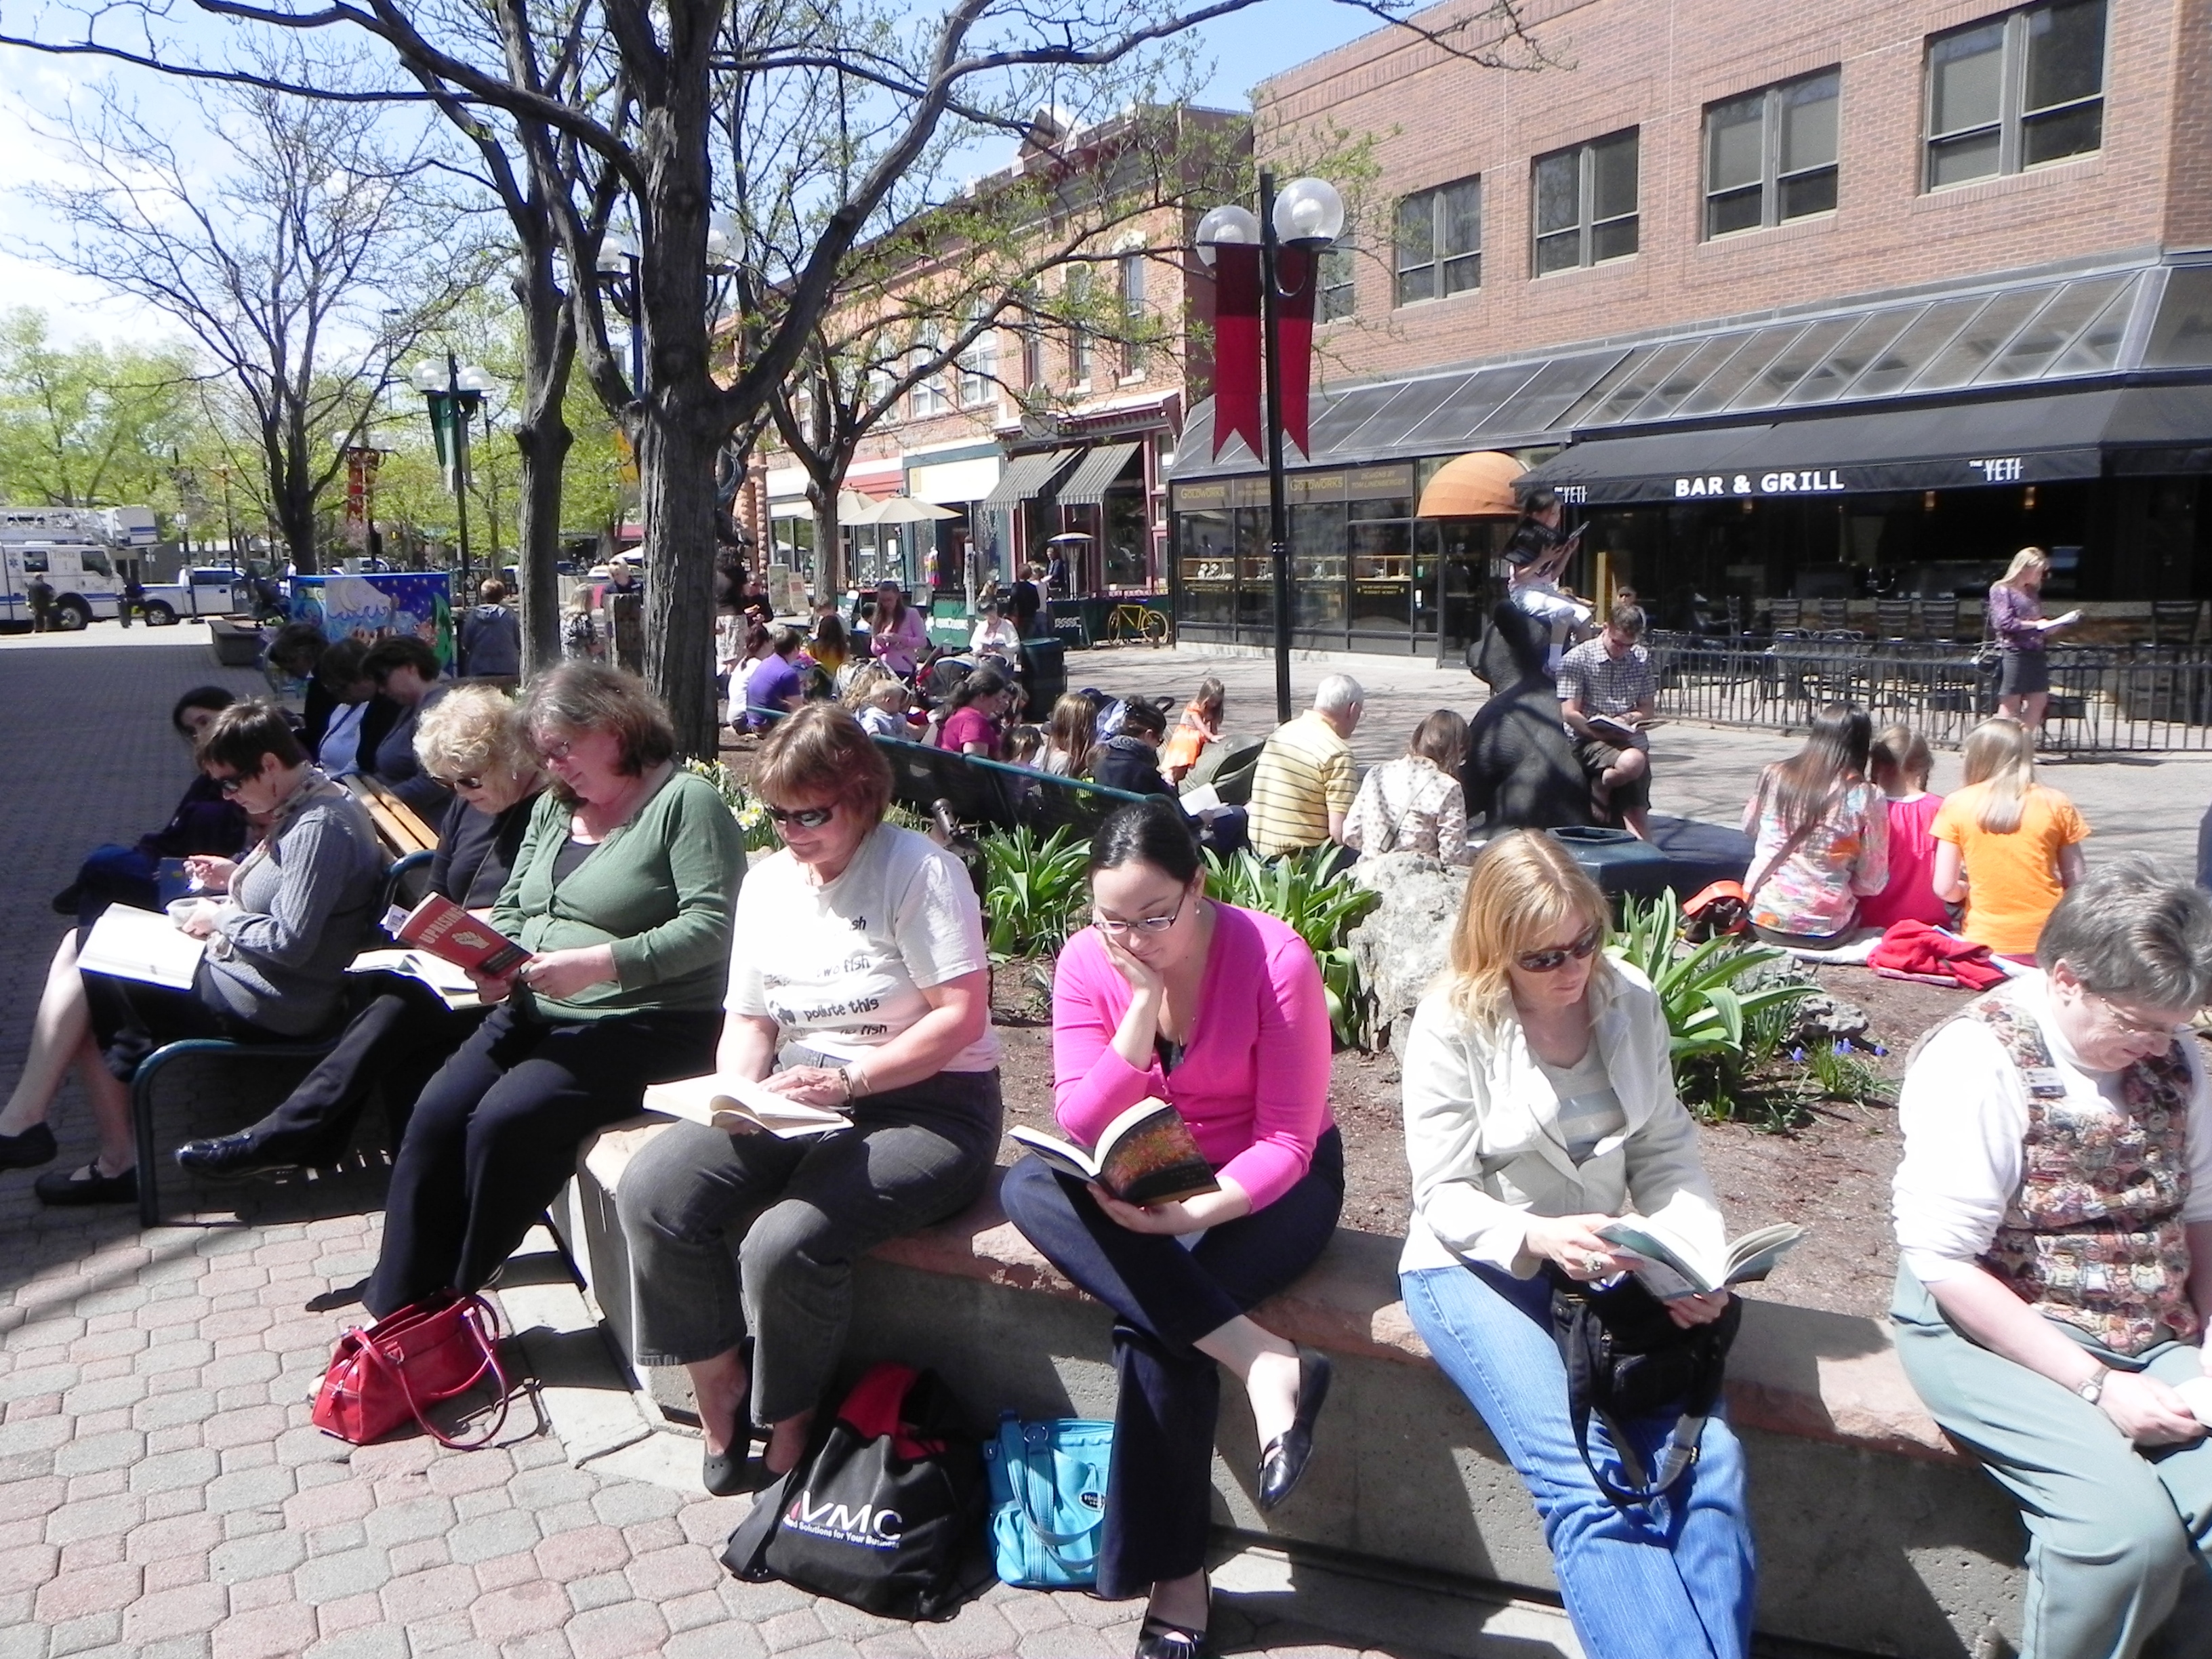 More than 300 community members and staff from Poudre River Public Library District in Fort Collins, Colorado, enjoy a 15-minute break with their favorite books, e-readers, and magazines during a Flash Mob Reading event for Drop Everything and Read Day April 12, part of NLW.